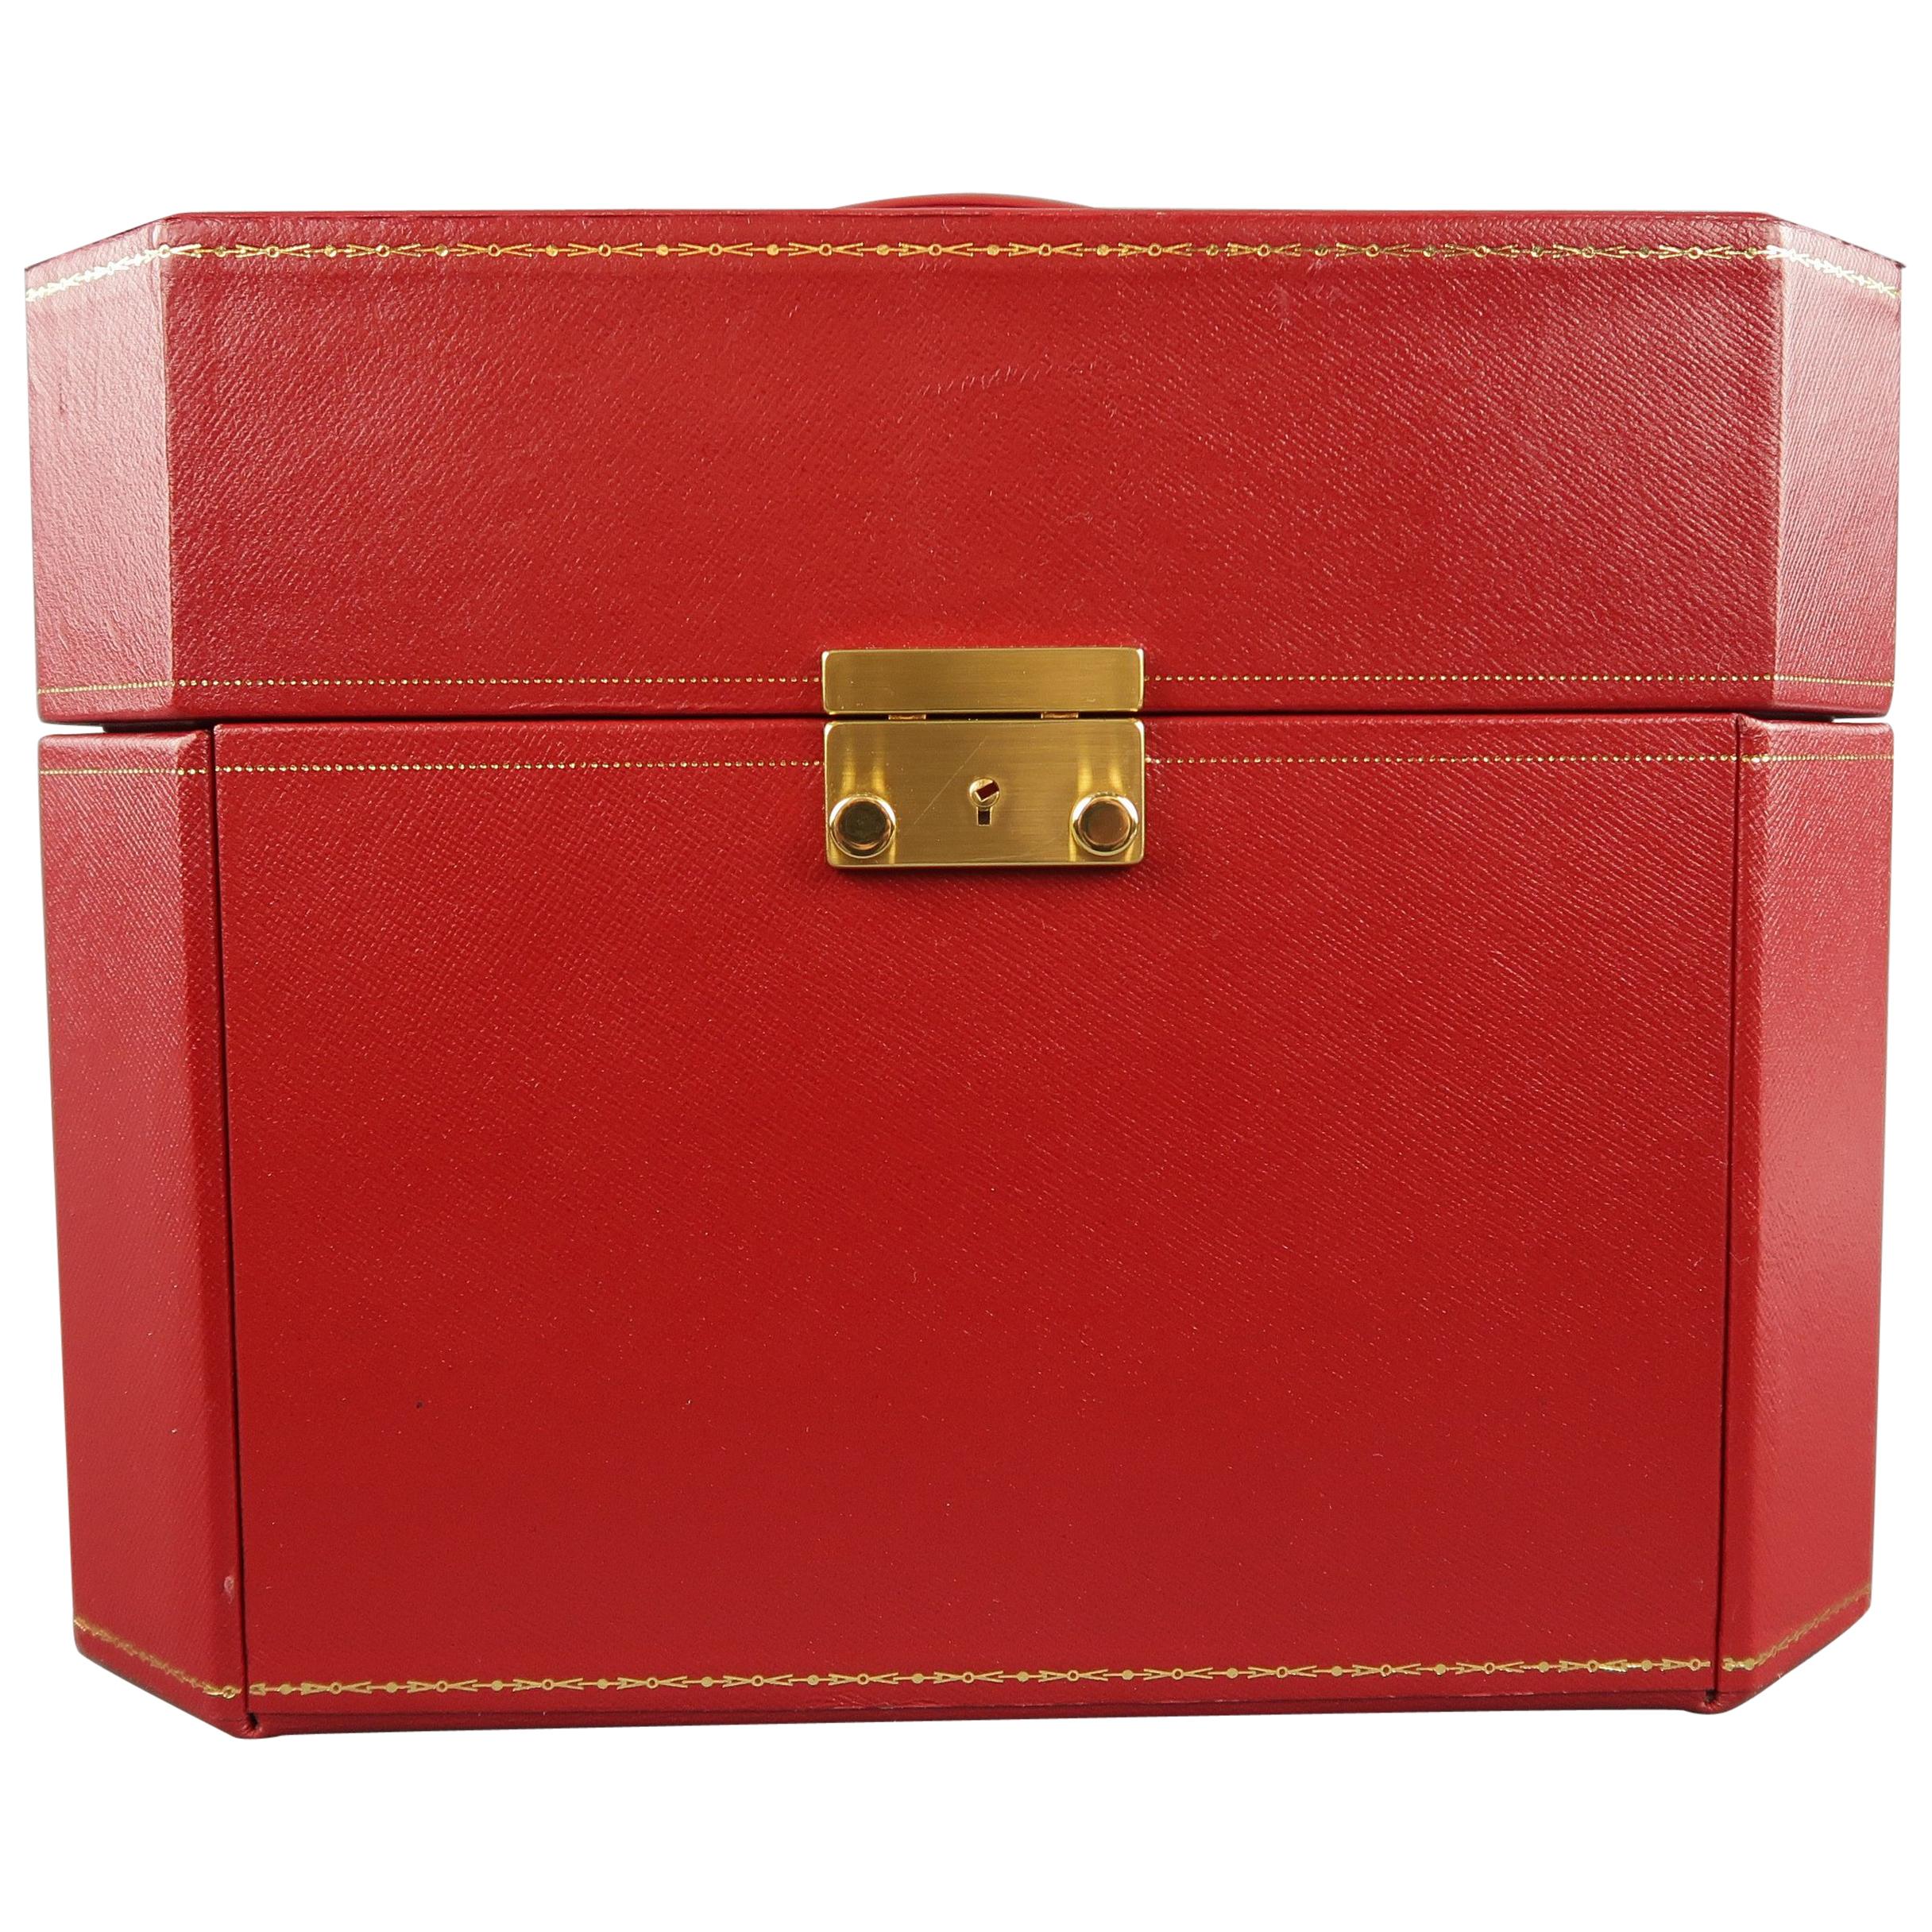 Vintage CARTIER Red Watch & Jewelry Storage Box with Drawer Compartments